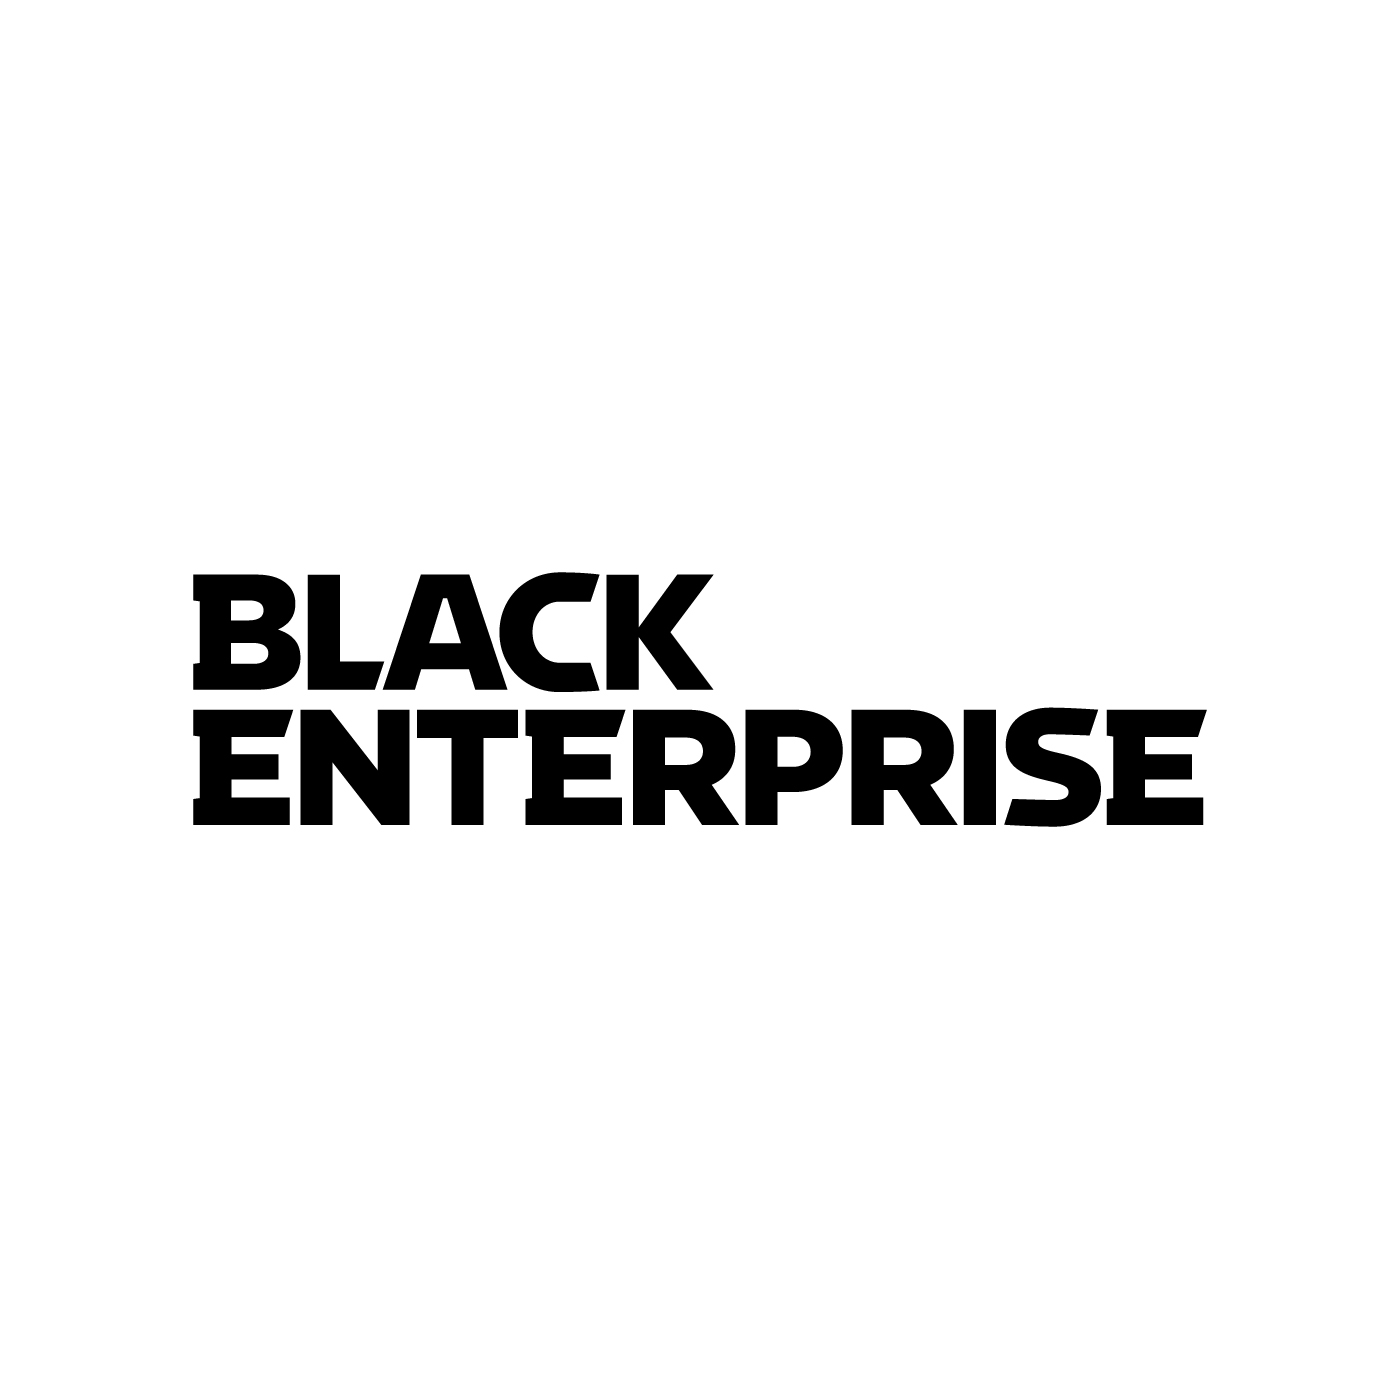 Founders of Black-Owned Ticketing Platform, Eventnoire, wins First Place in $1 Million Startup Competition.